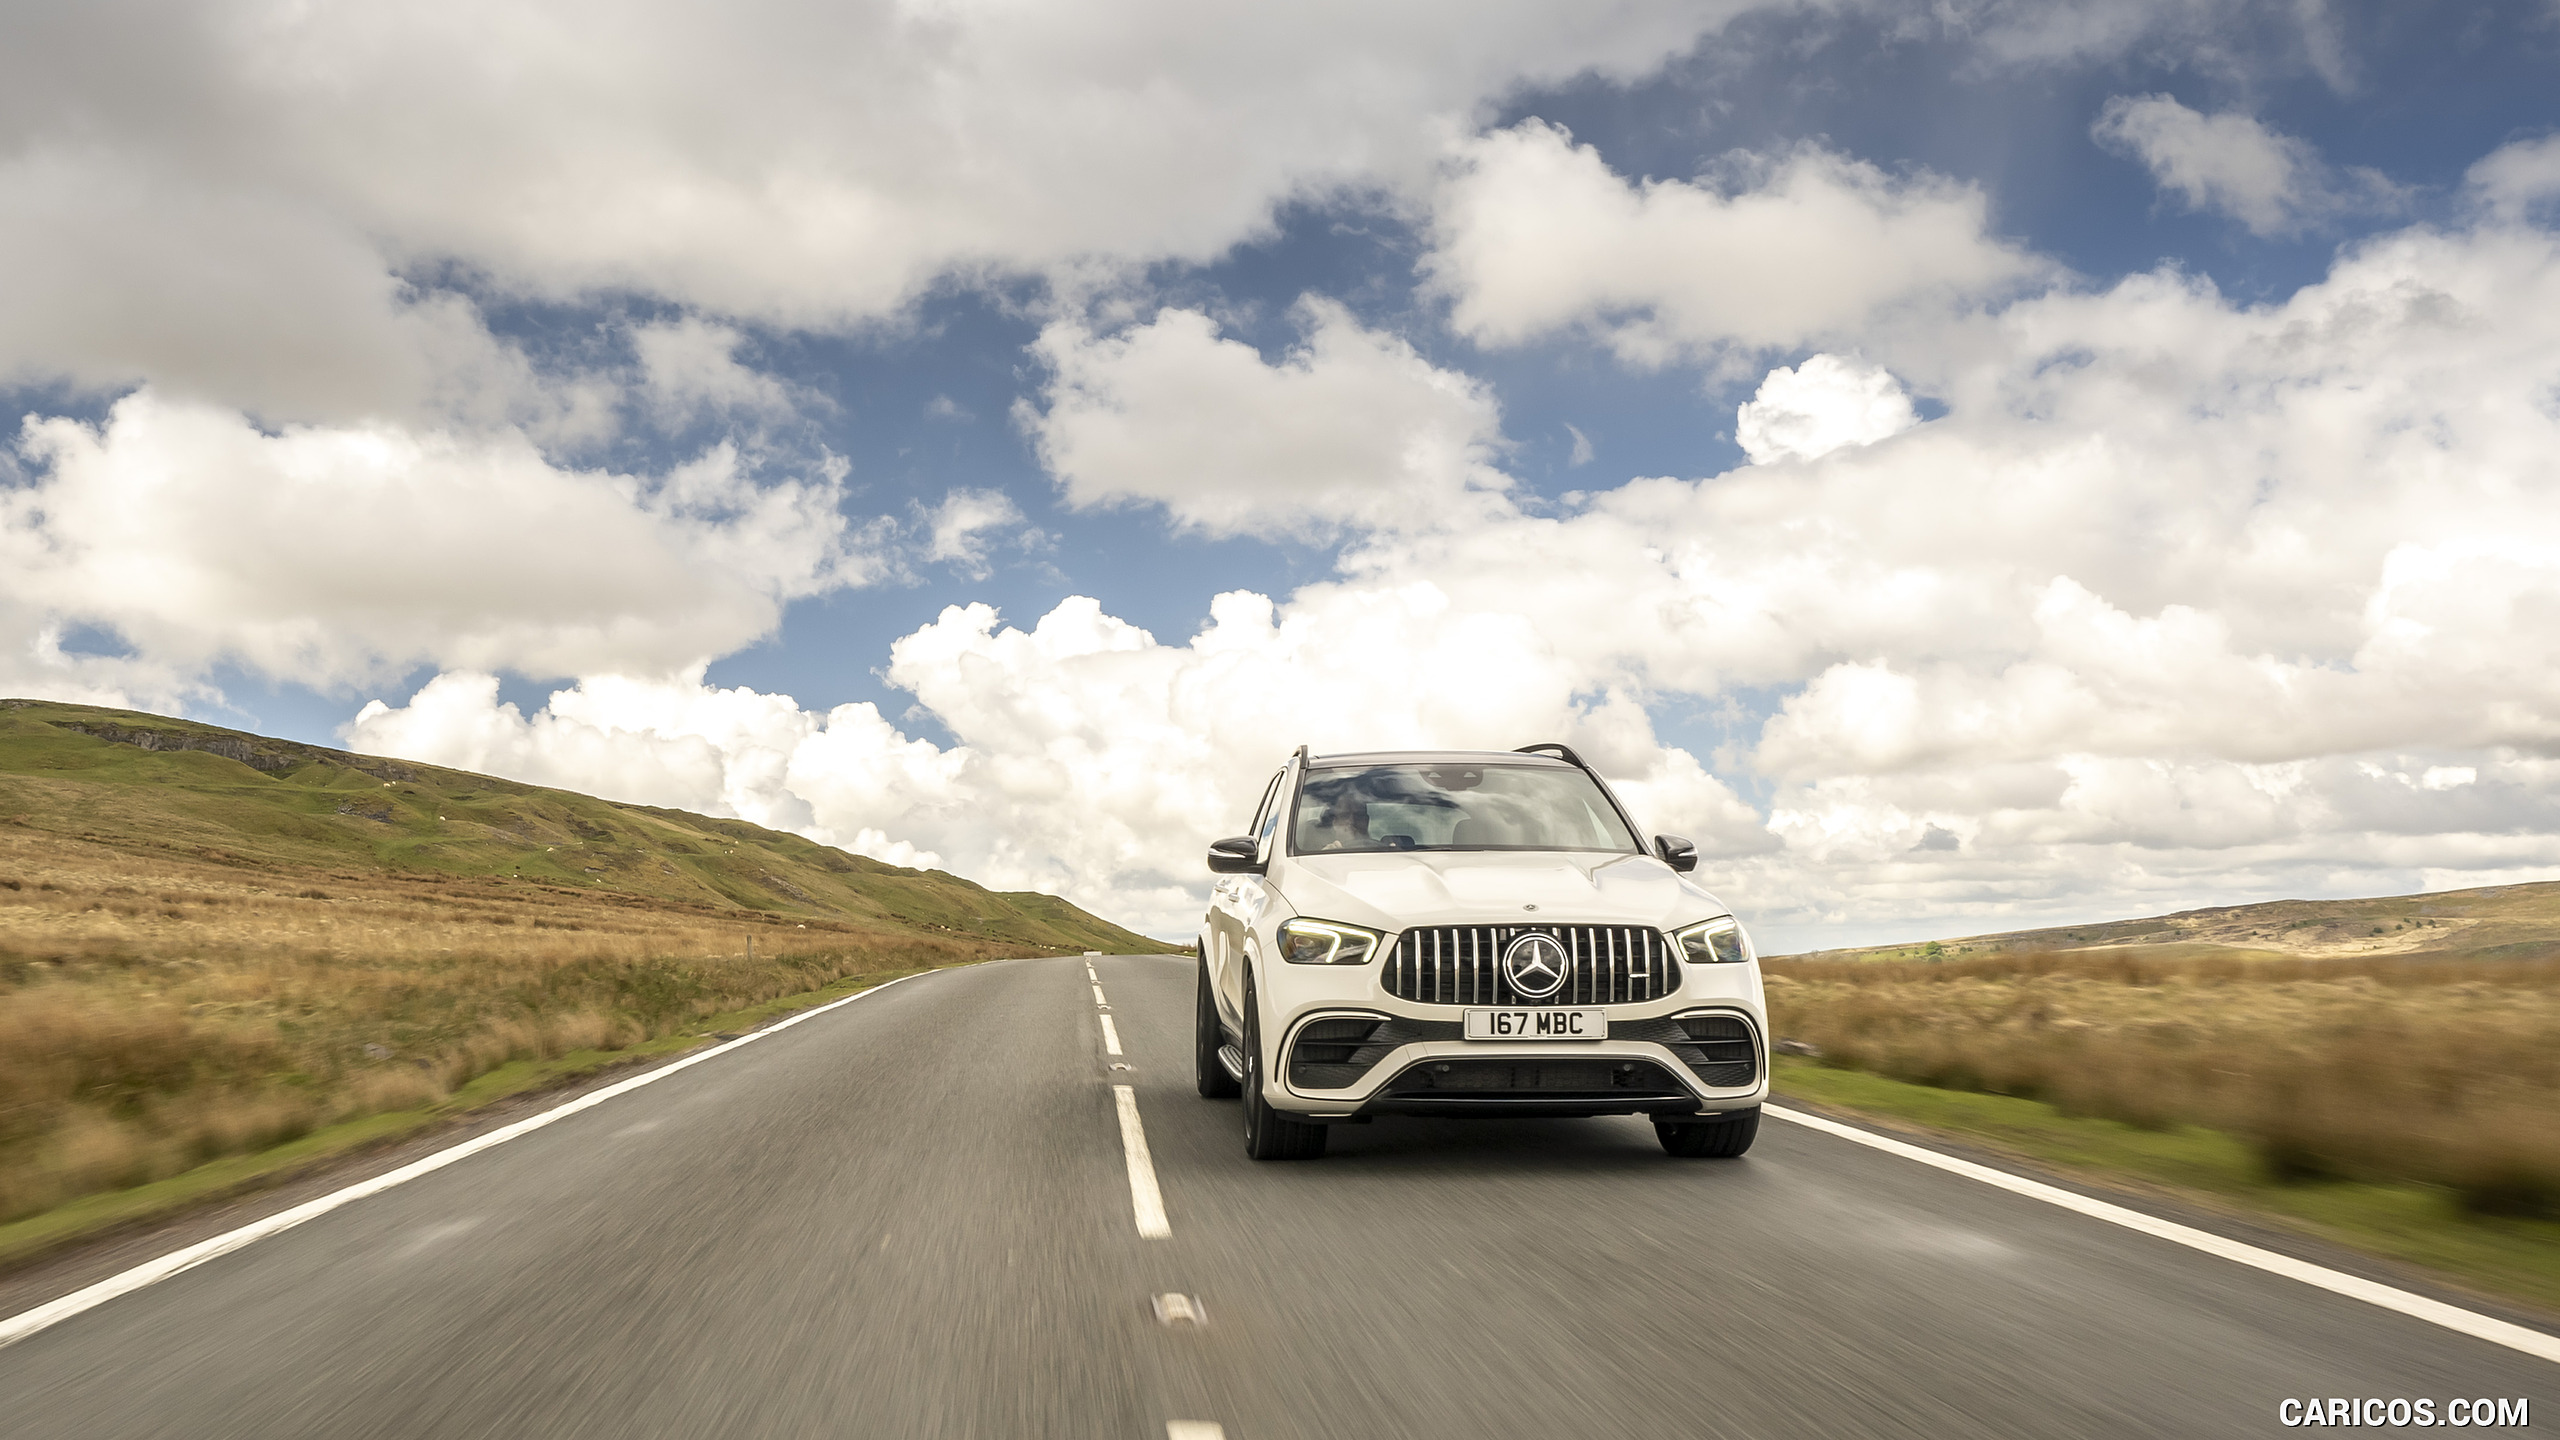 2021 Mercedes-AMG GLE 63 S 4MATIC (UK-Spec) - Front, #122 of 187